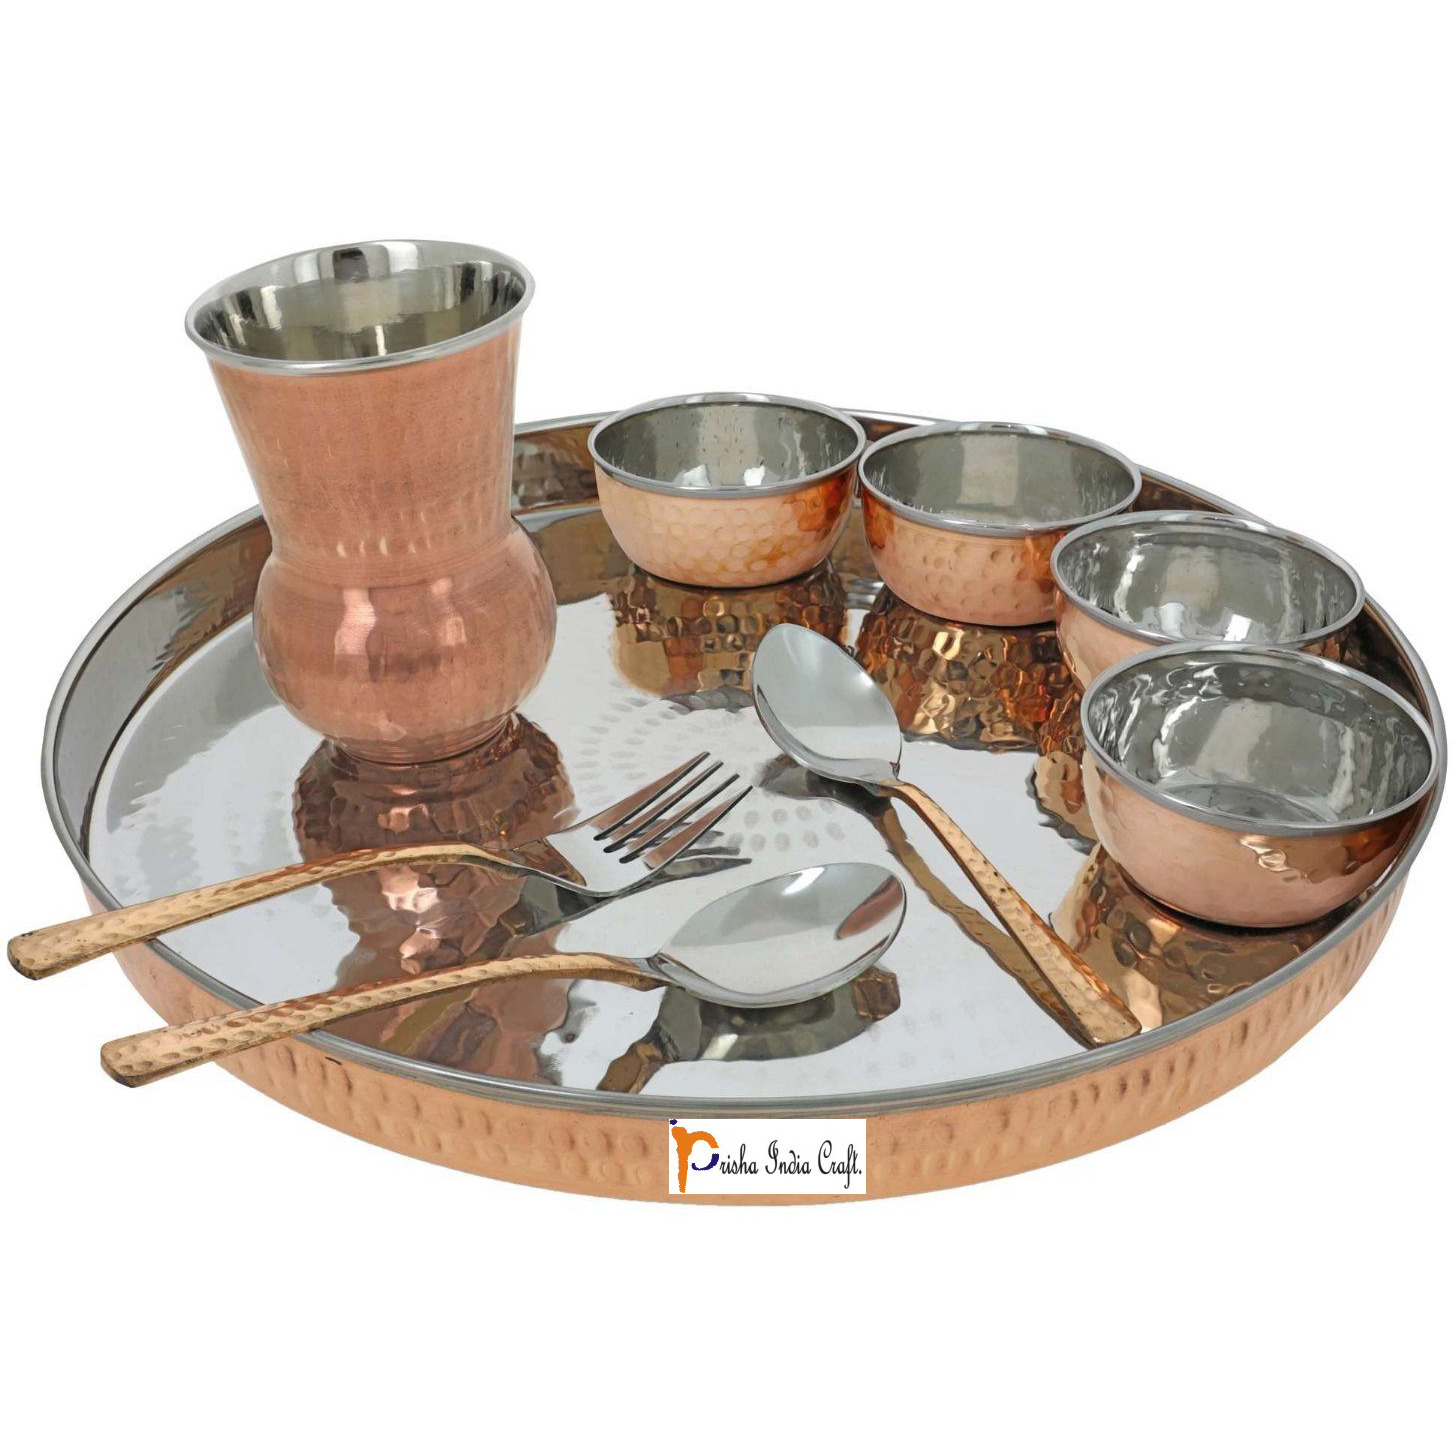 Prisha India Craft B. Set of 6 Dinnerware Traditional Stainless Steel Copper Dinner Set of Thali Plate, Bowls, Glass and Spoons, Dia 13  With 1 Pure Copper Mughal Pitcher Jug - Christmas Gift